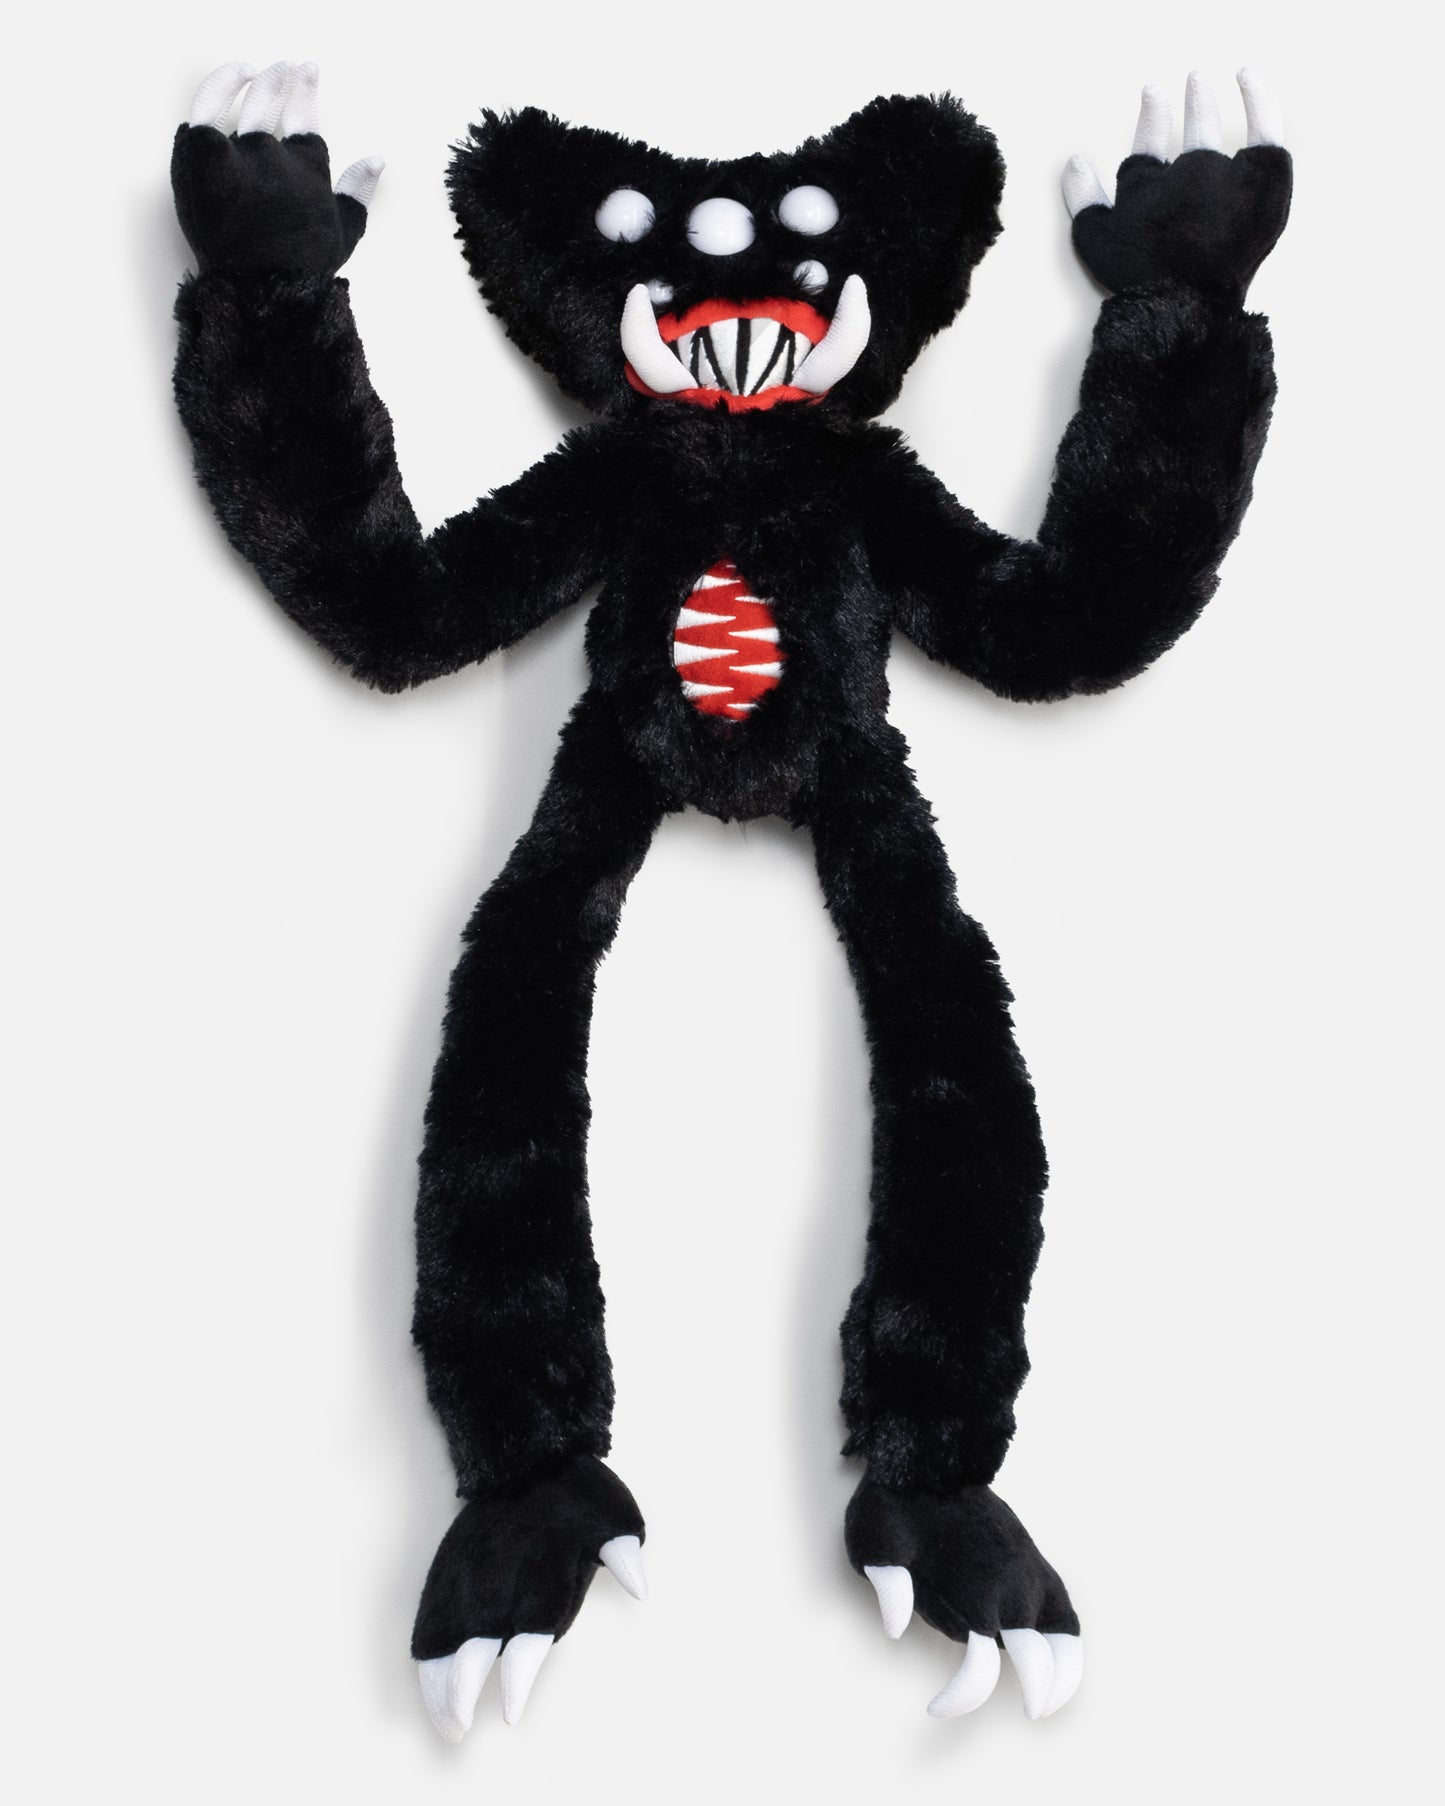 killy willy poppy playtime 19" plush front arms up